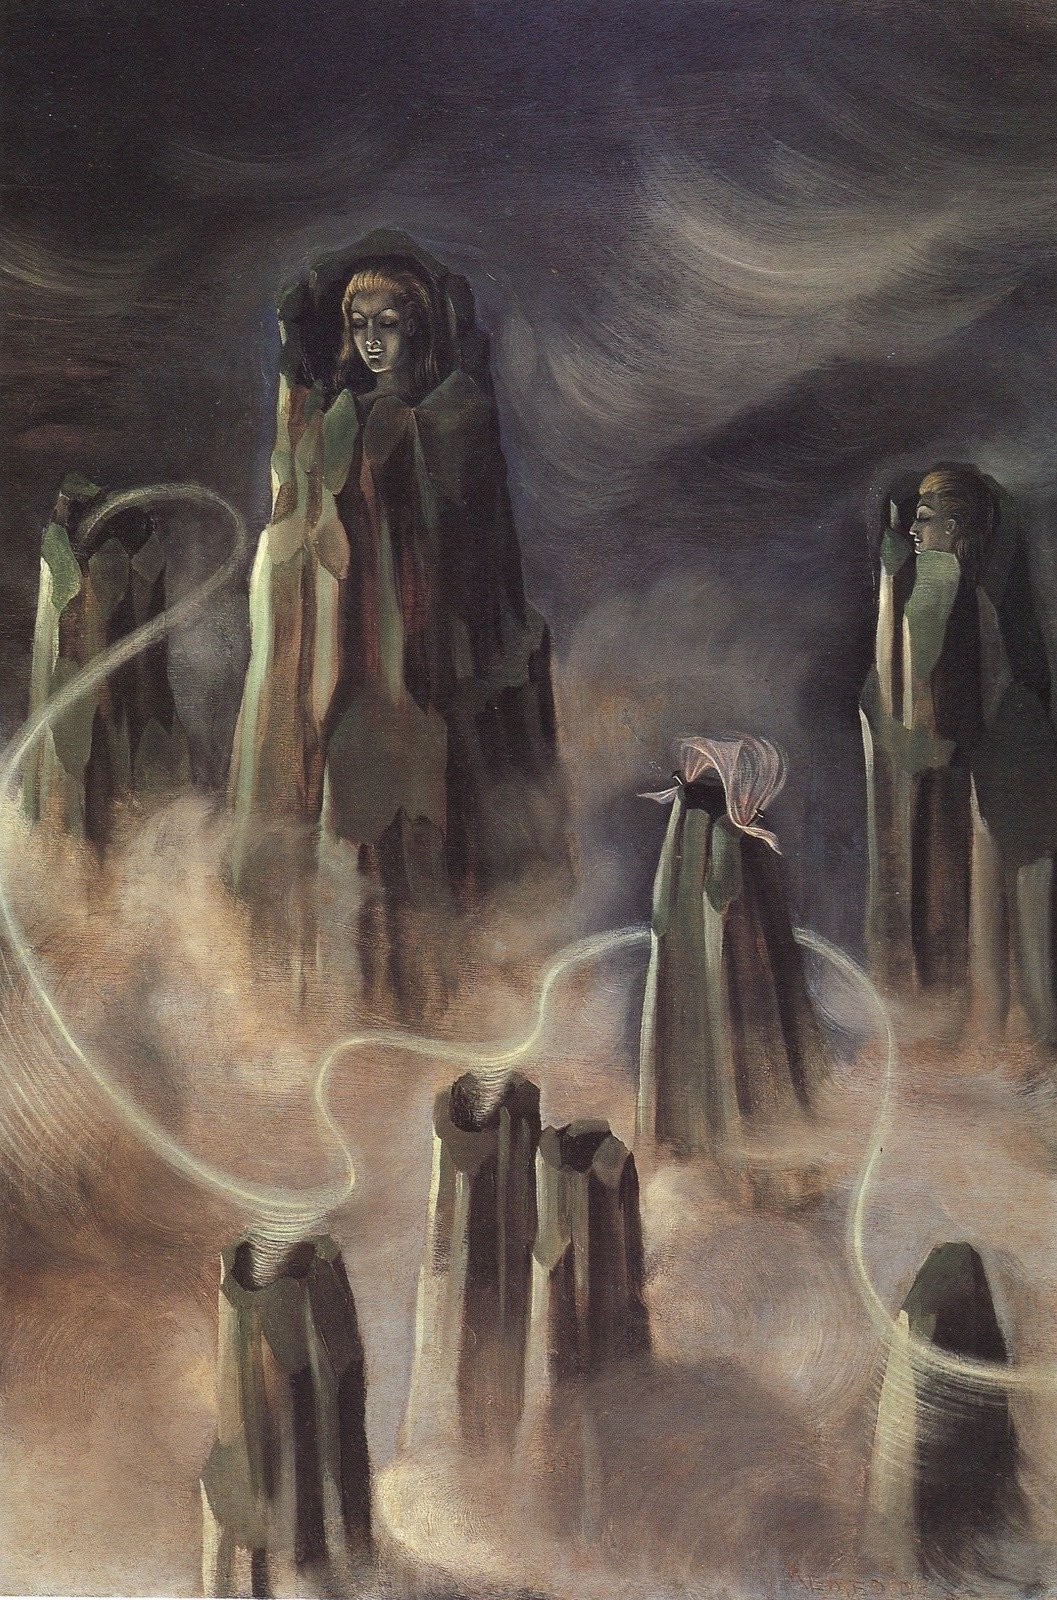 Remedios Varo, The Souls of the Mountain, 1938